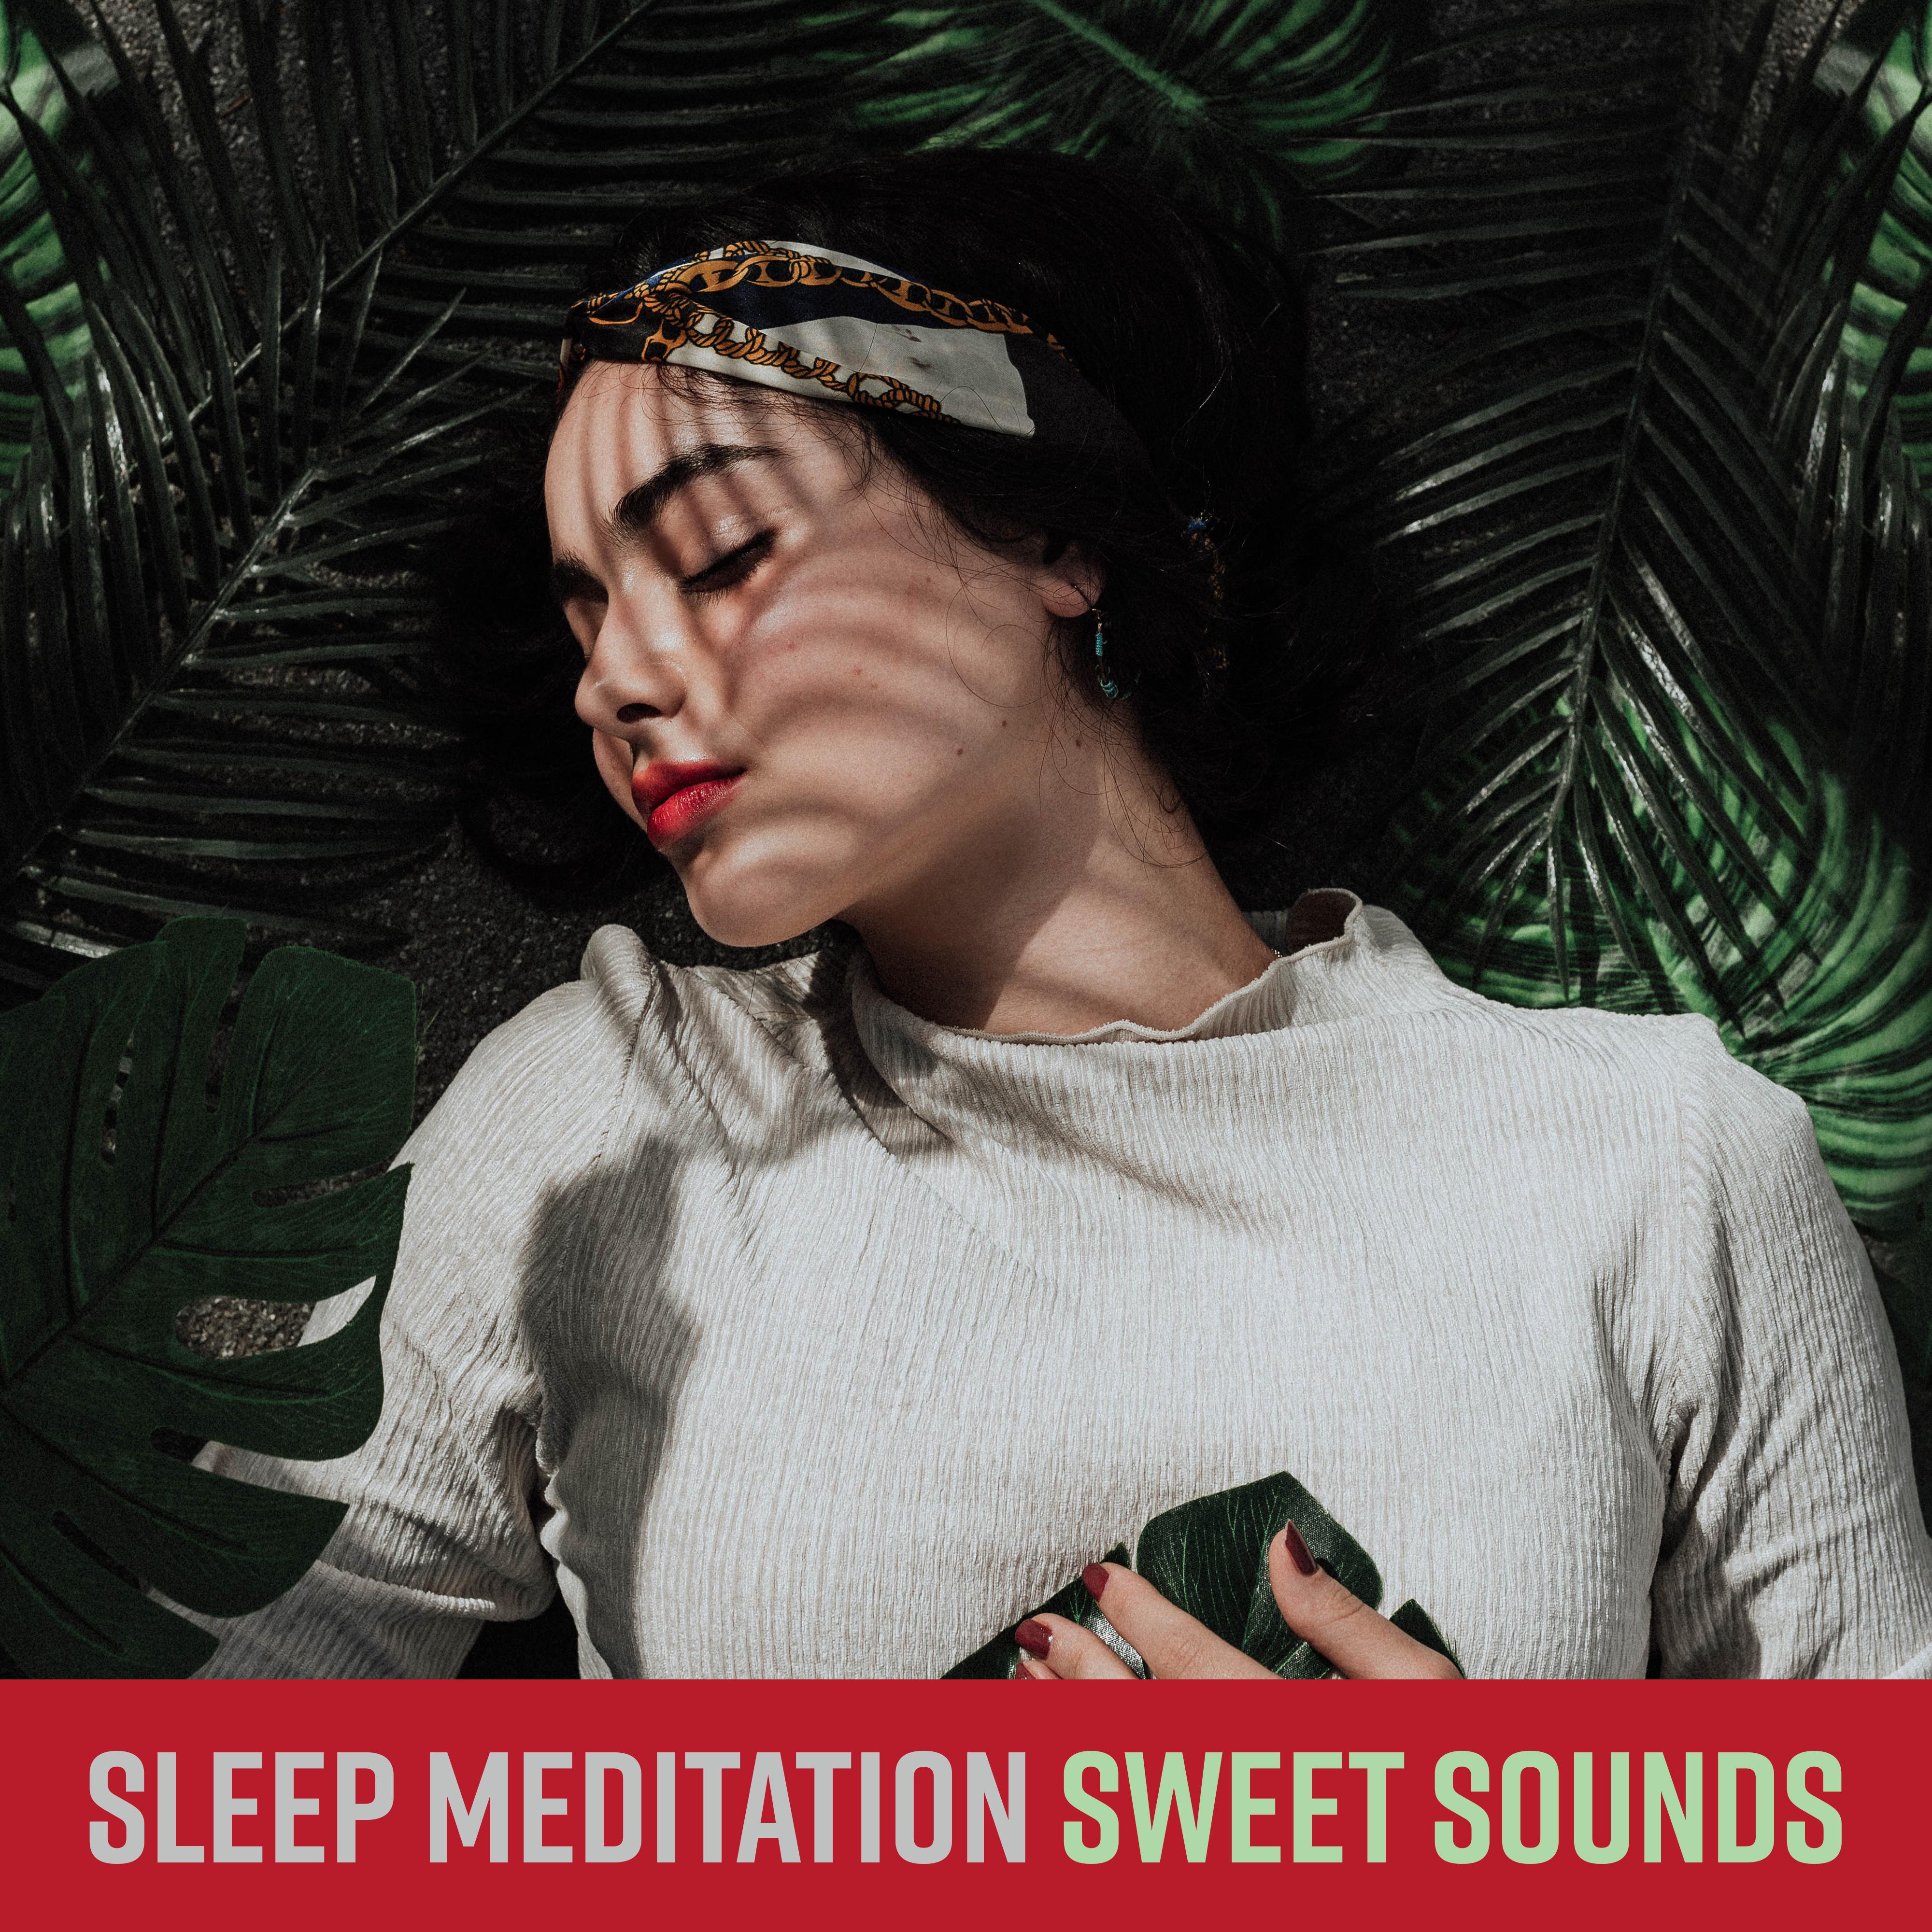 Sleep Meditation Sweet Sounds: New Age 2019 Music Selection for Perfect Sleep , Calming Down, Relax After Tough Day